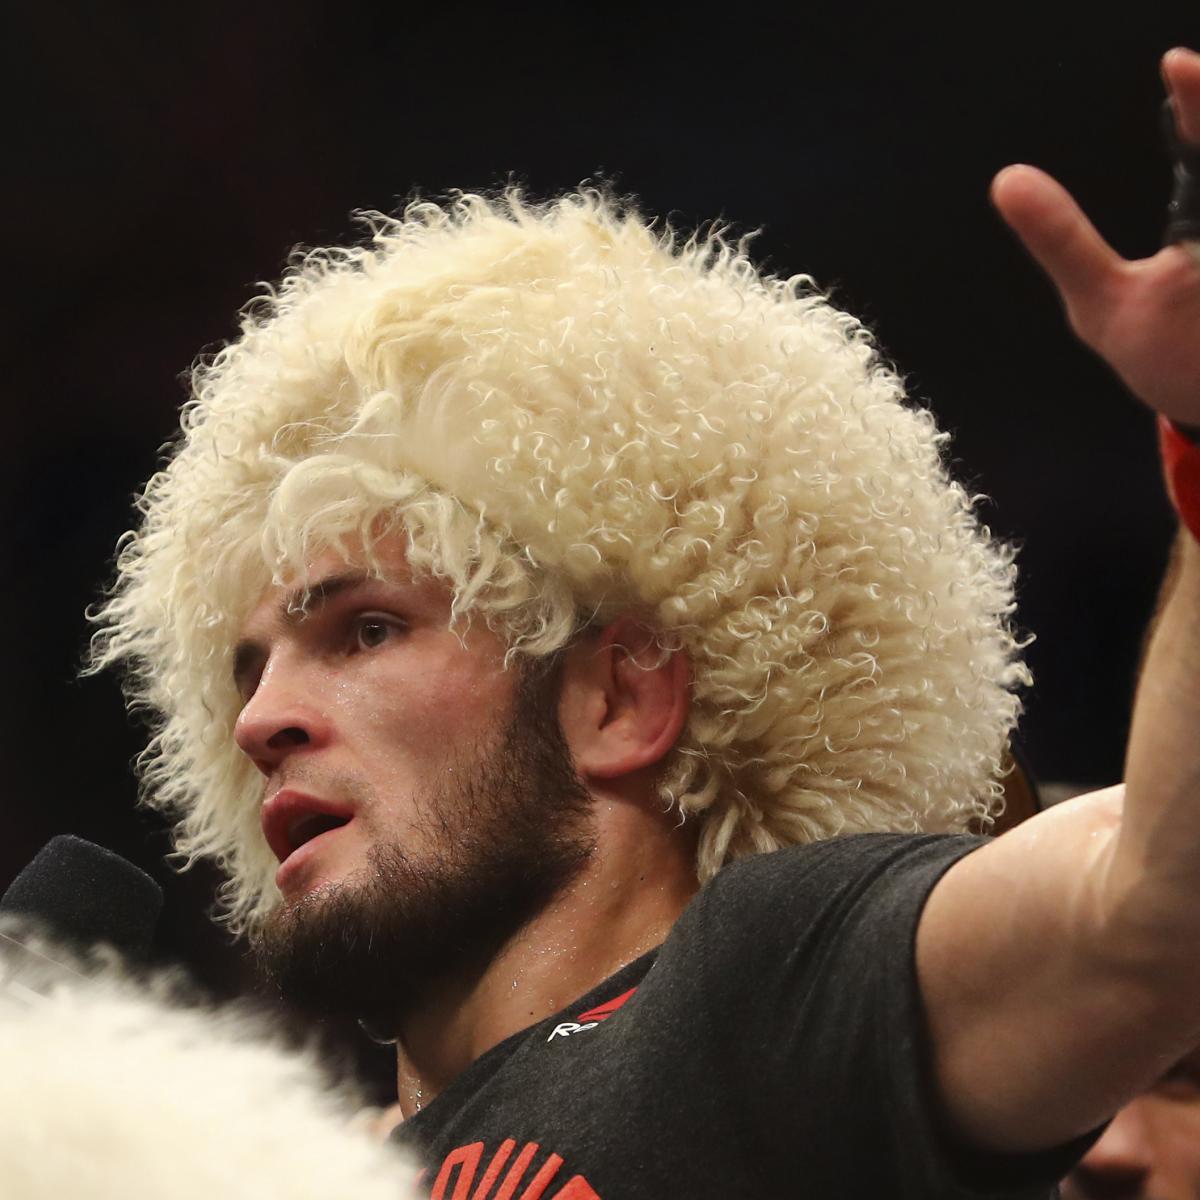 Dana White Says Khabib’s UFC Return ‘Doesn’t Sound Very Obvious’ After UFC 257